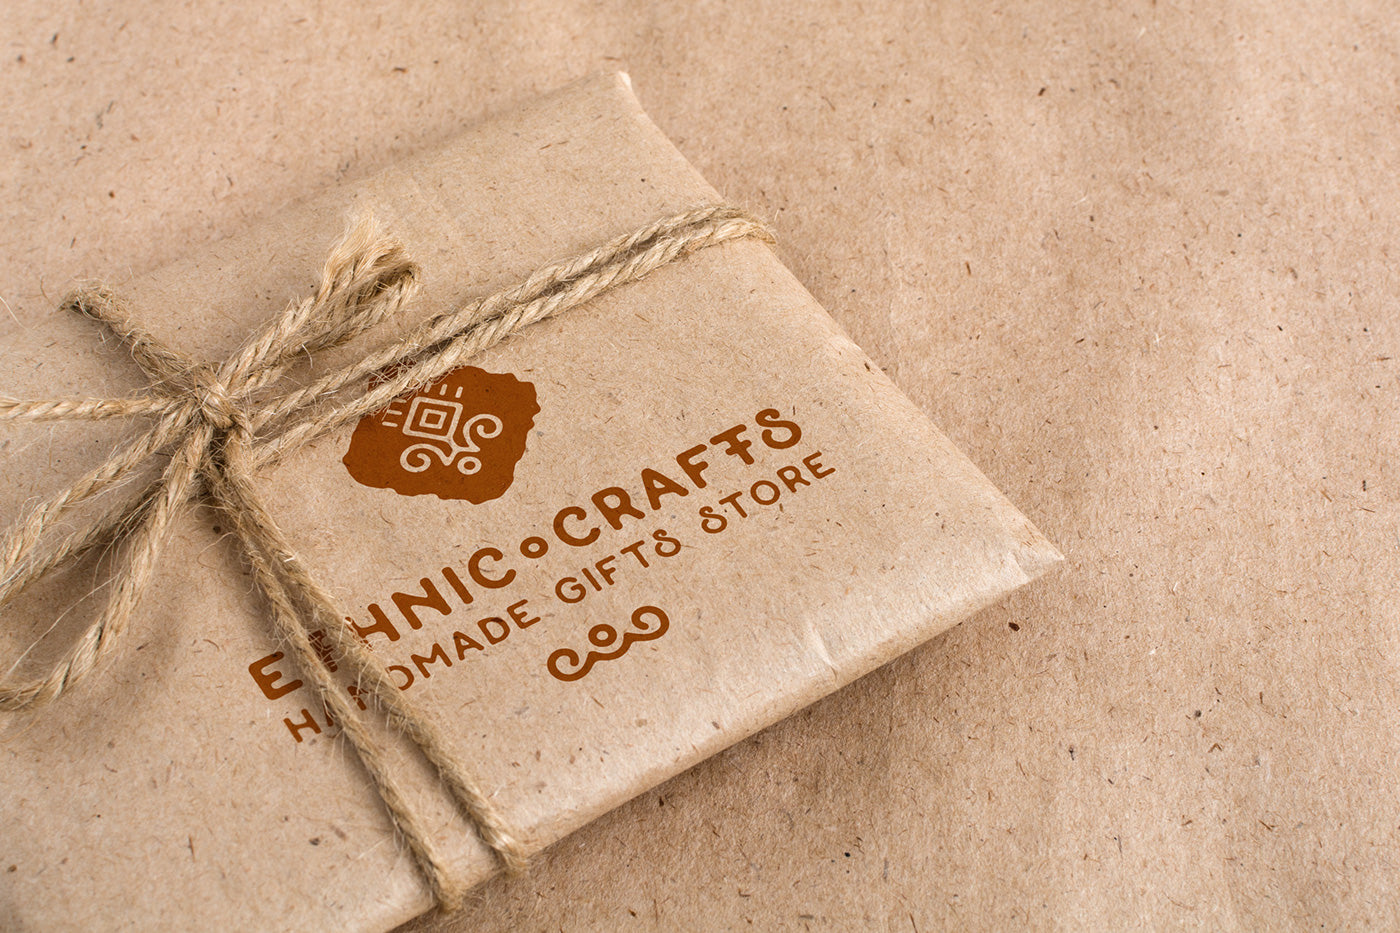 craft paper packaging